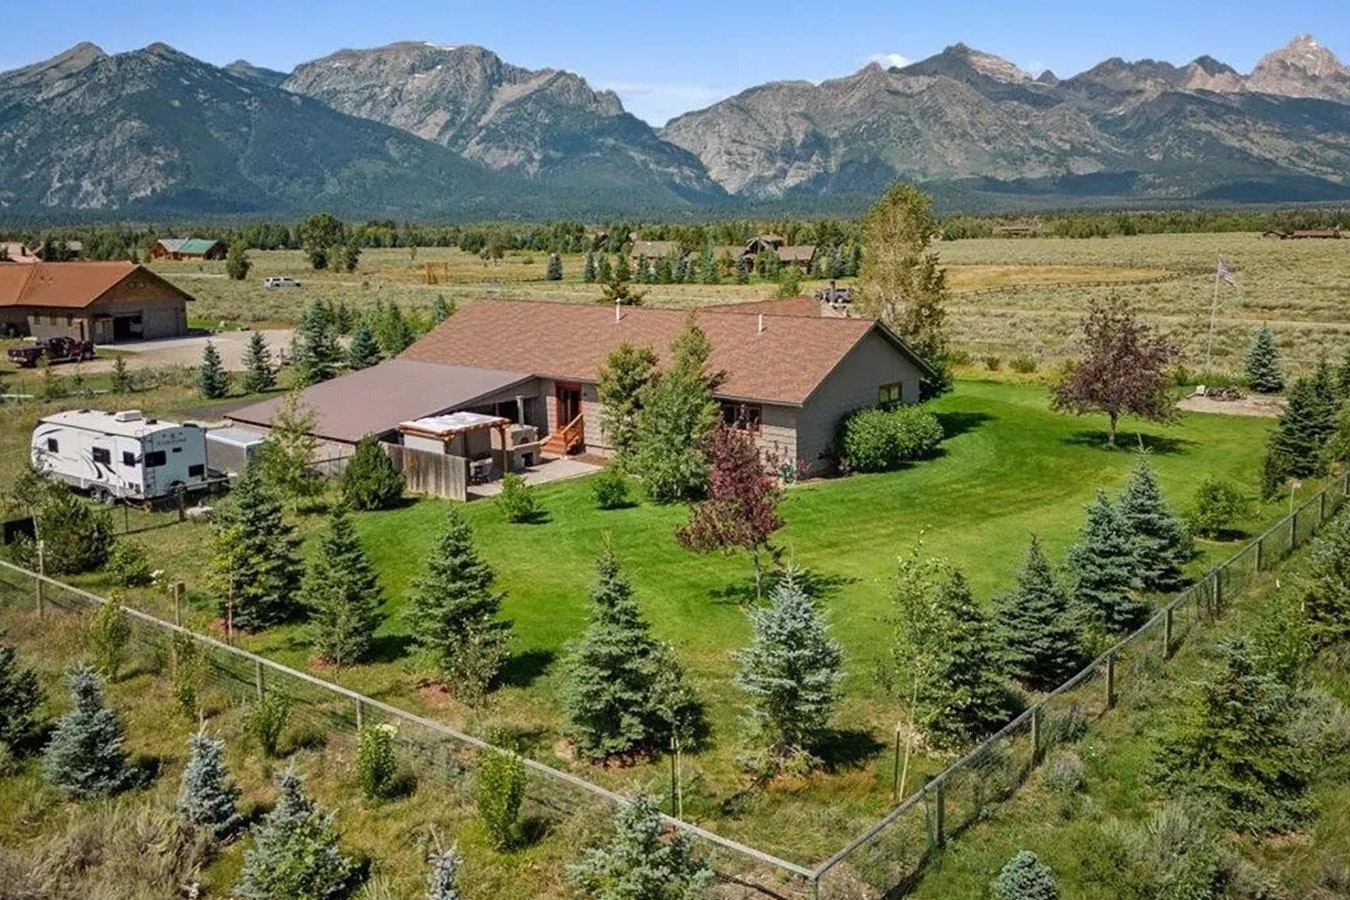 This four-bedroom, three-bath home on 3 acres in Jackson is listing for $3,995,000.